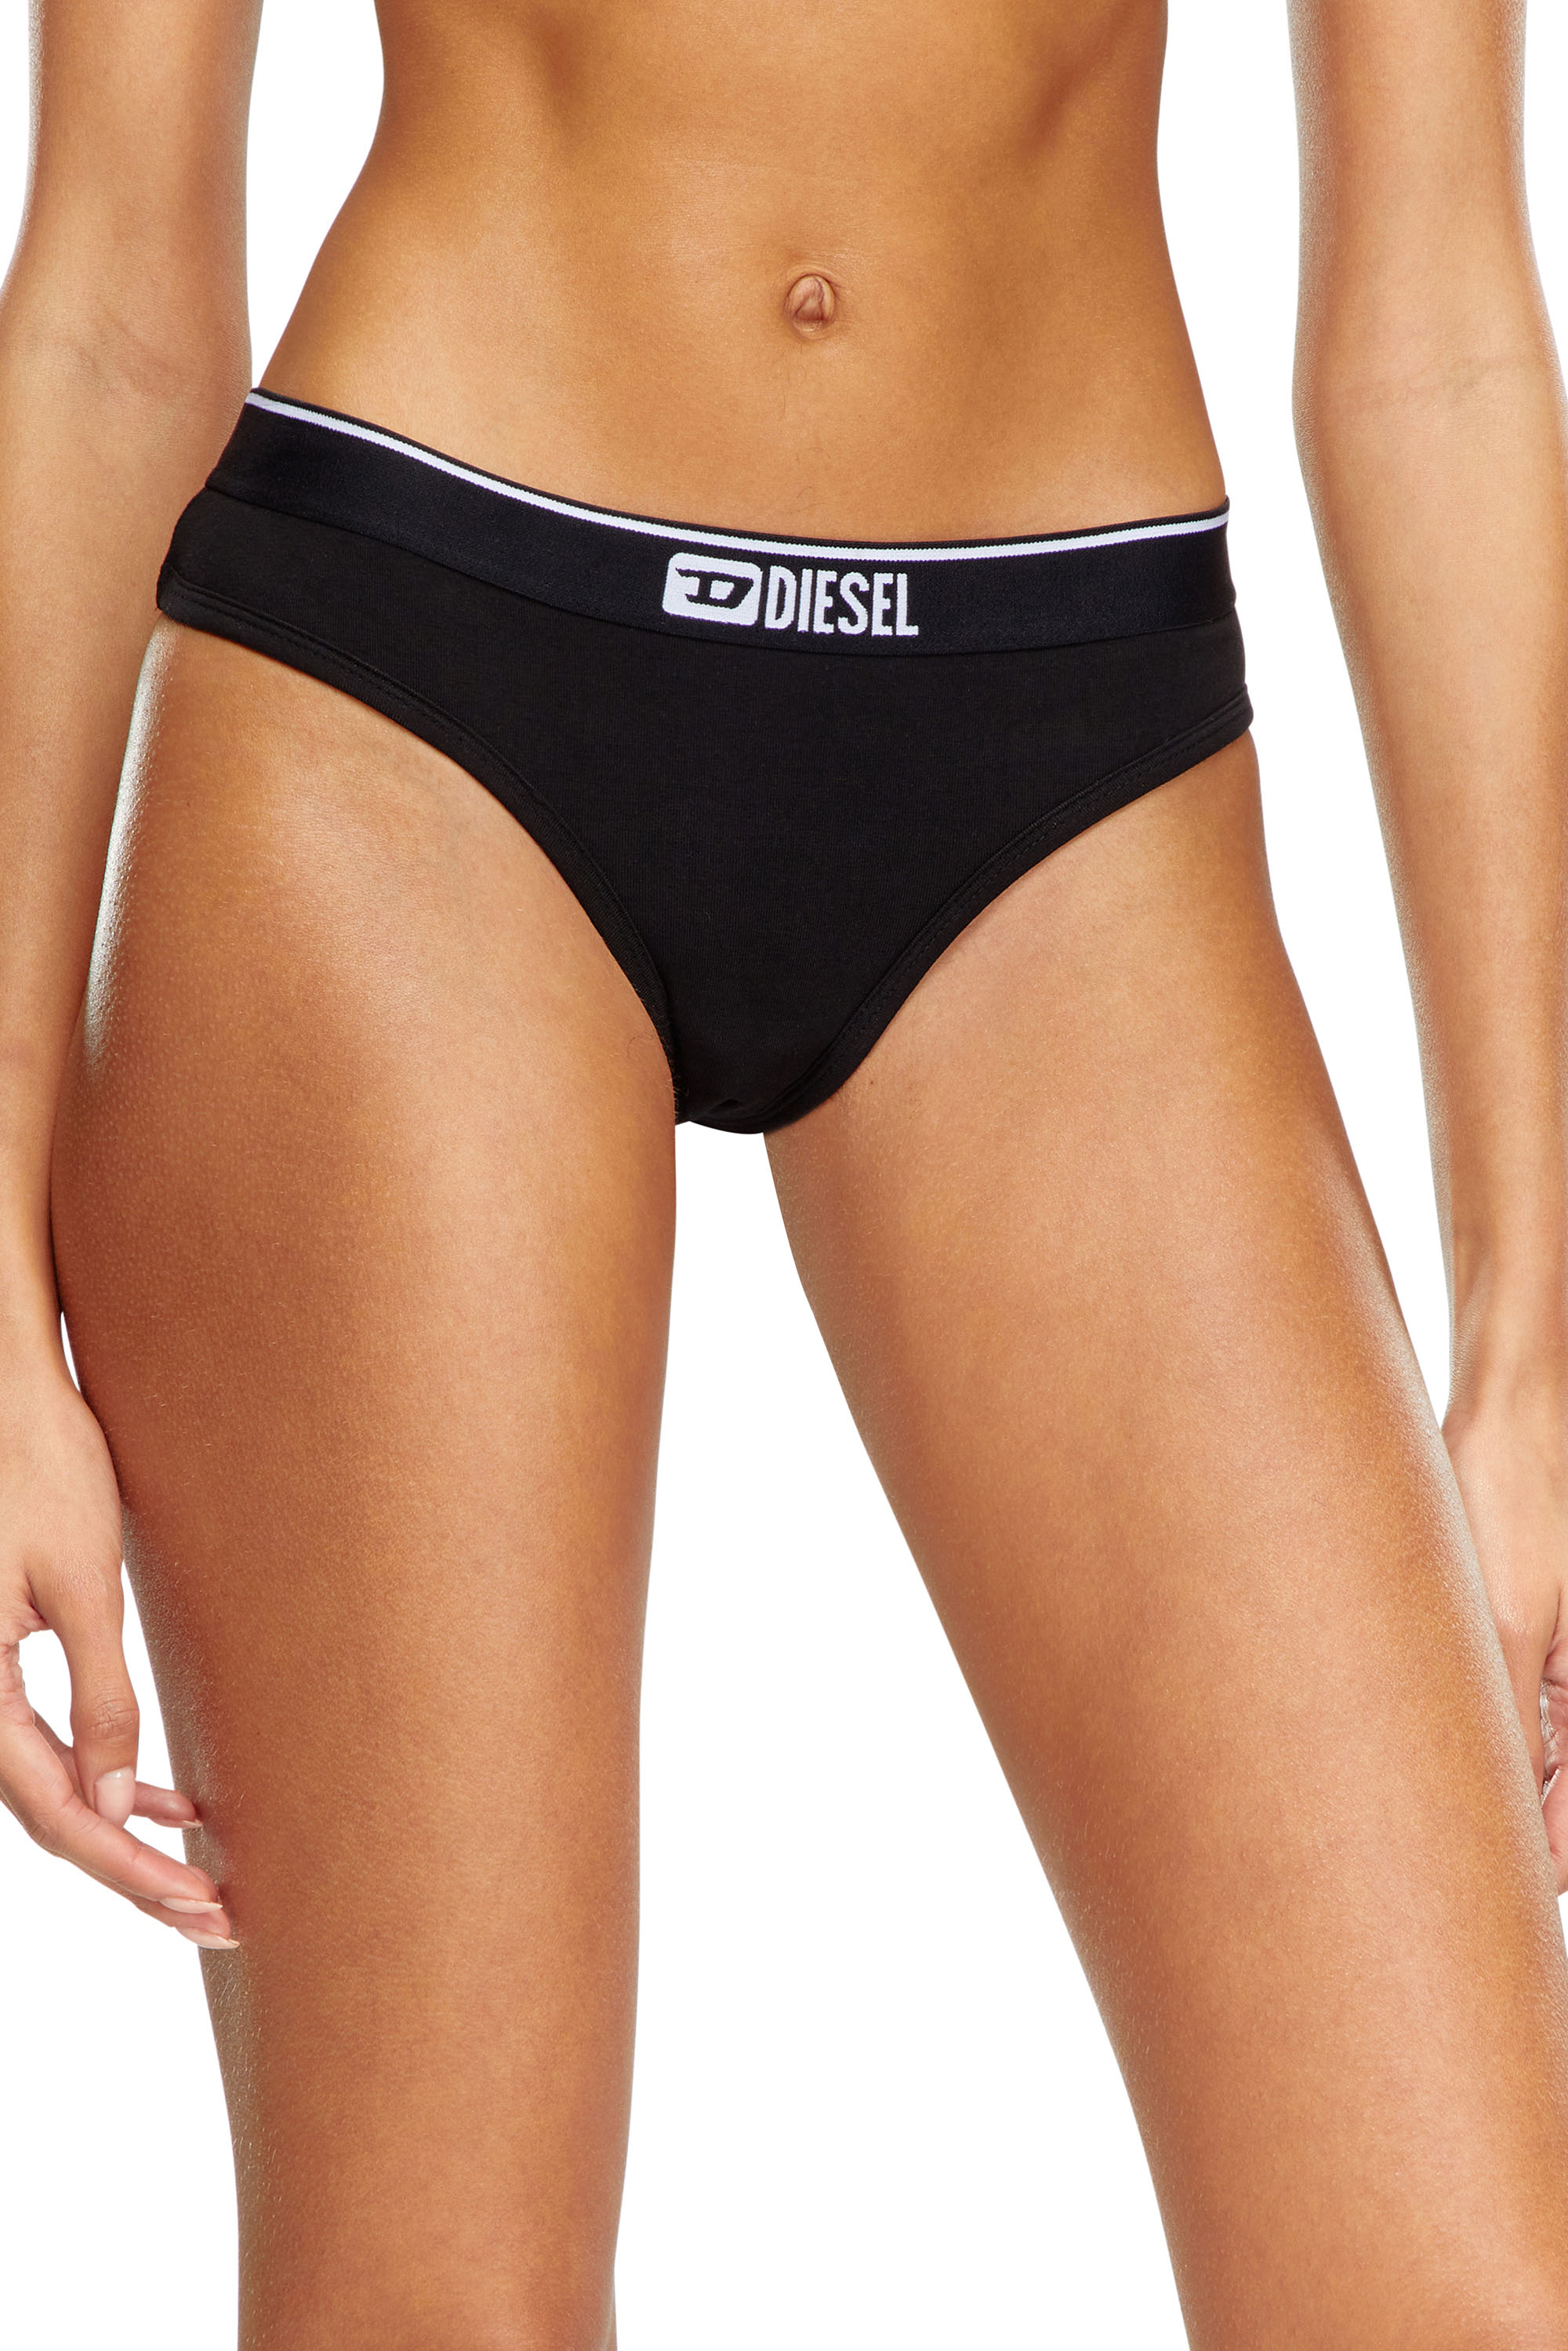 UFPN-OXYS-TWOPACK Woman: Two-pack of briefs with shiny waist